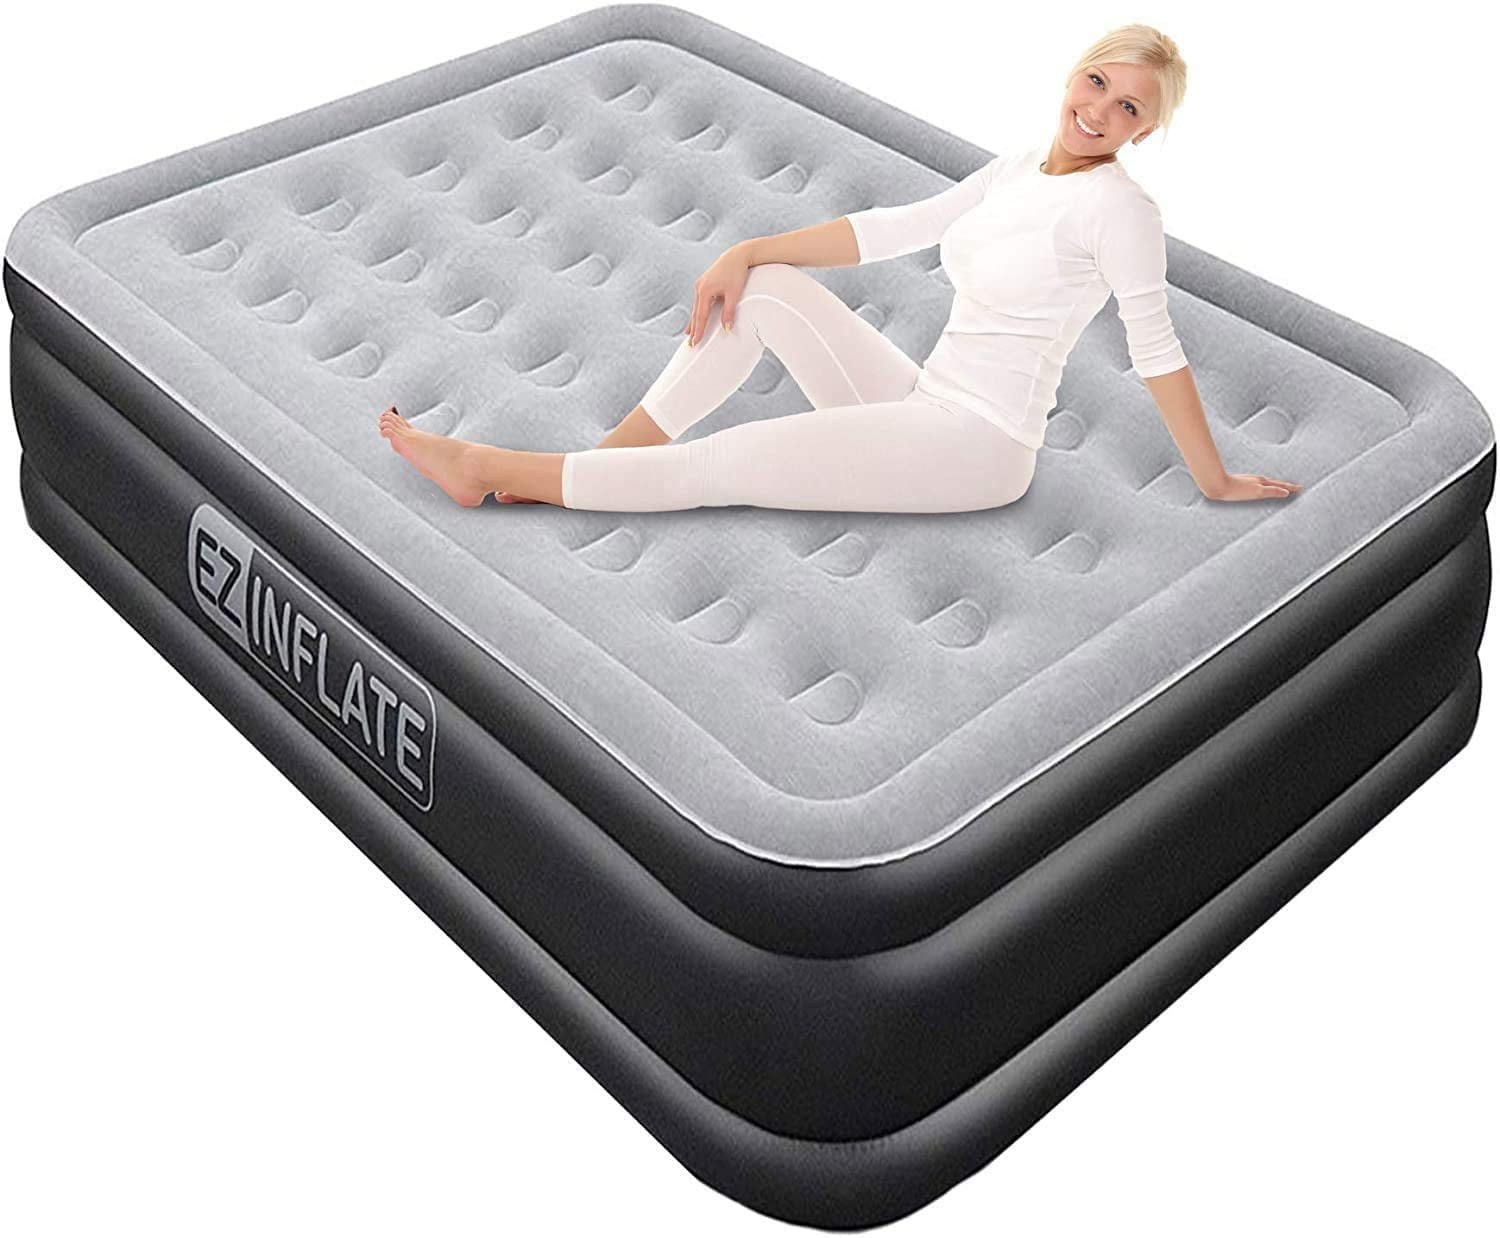 Air Bed Mattress Inflatable Sleeping Camping Bed Pad Electric Pump Home Use HOT 